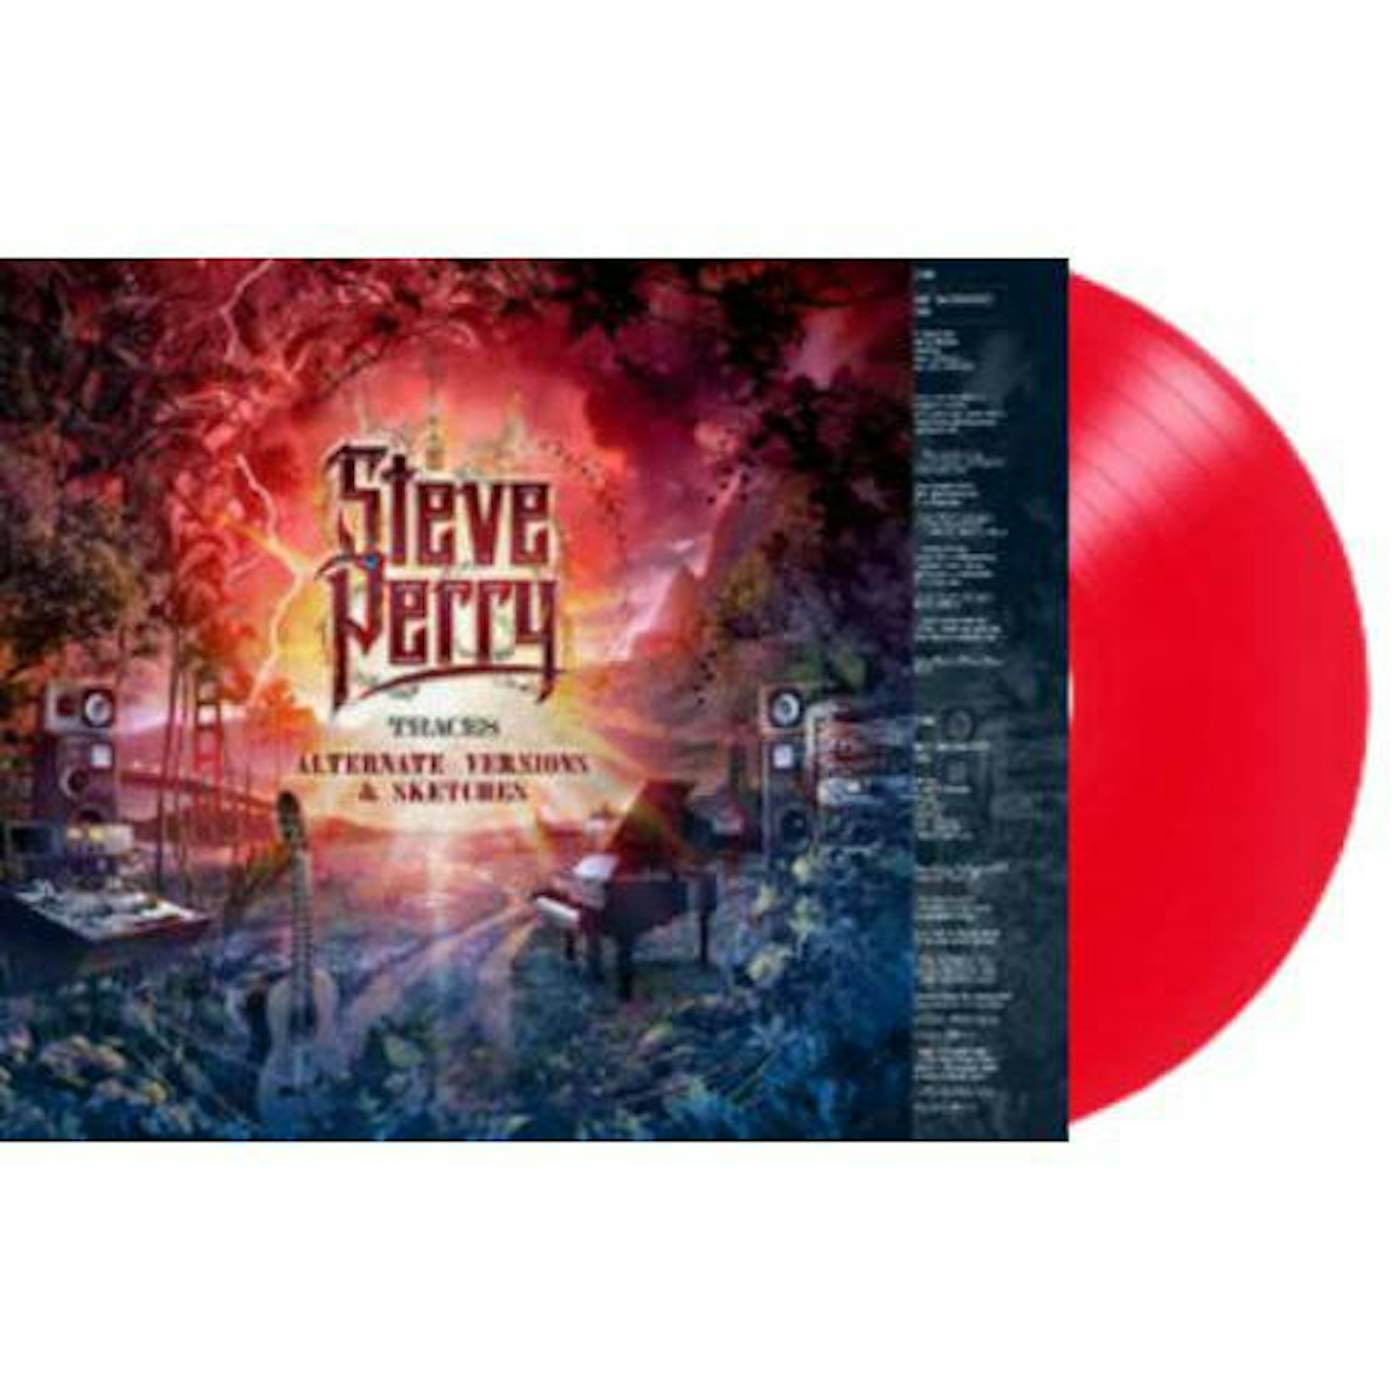 Steve Perry Traces (Alternate Versions & Sketches) Vinyl Record